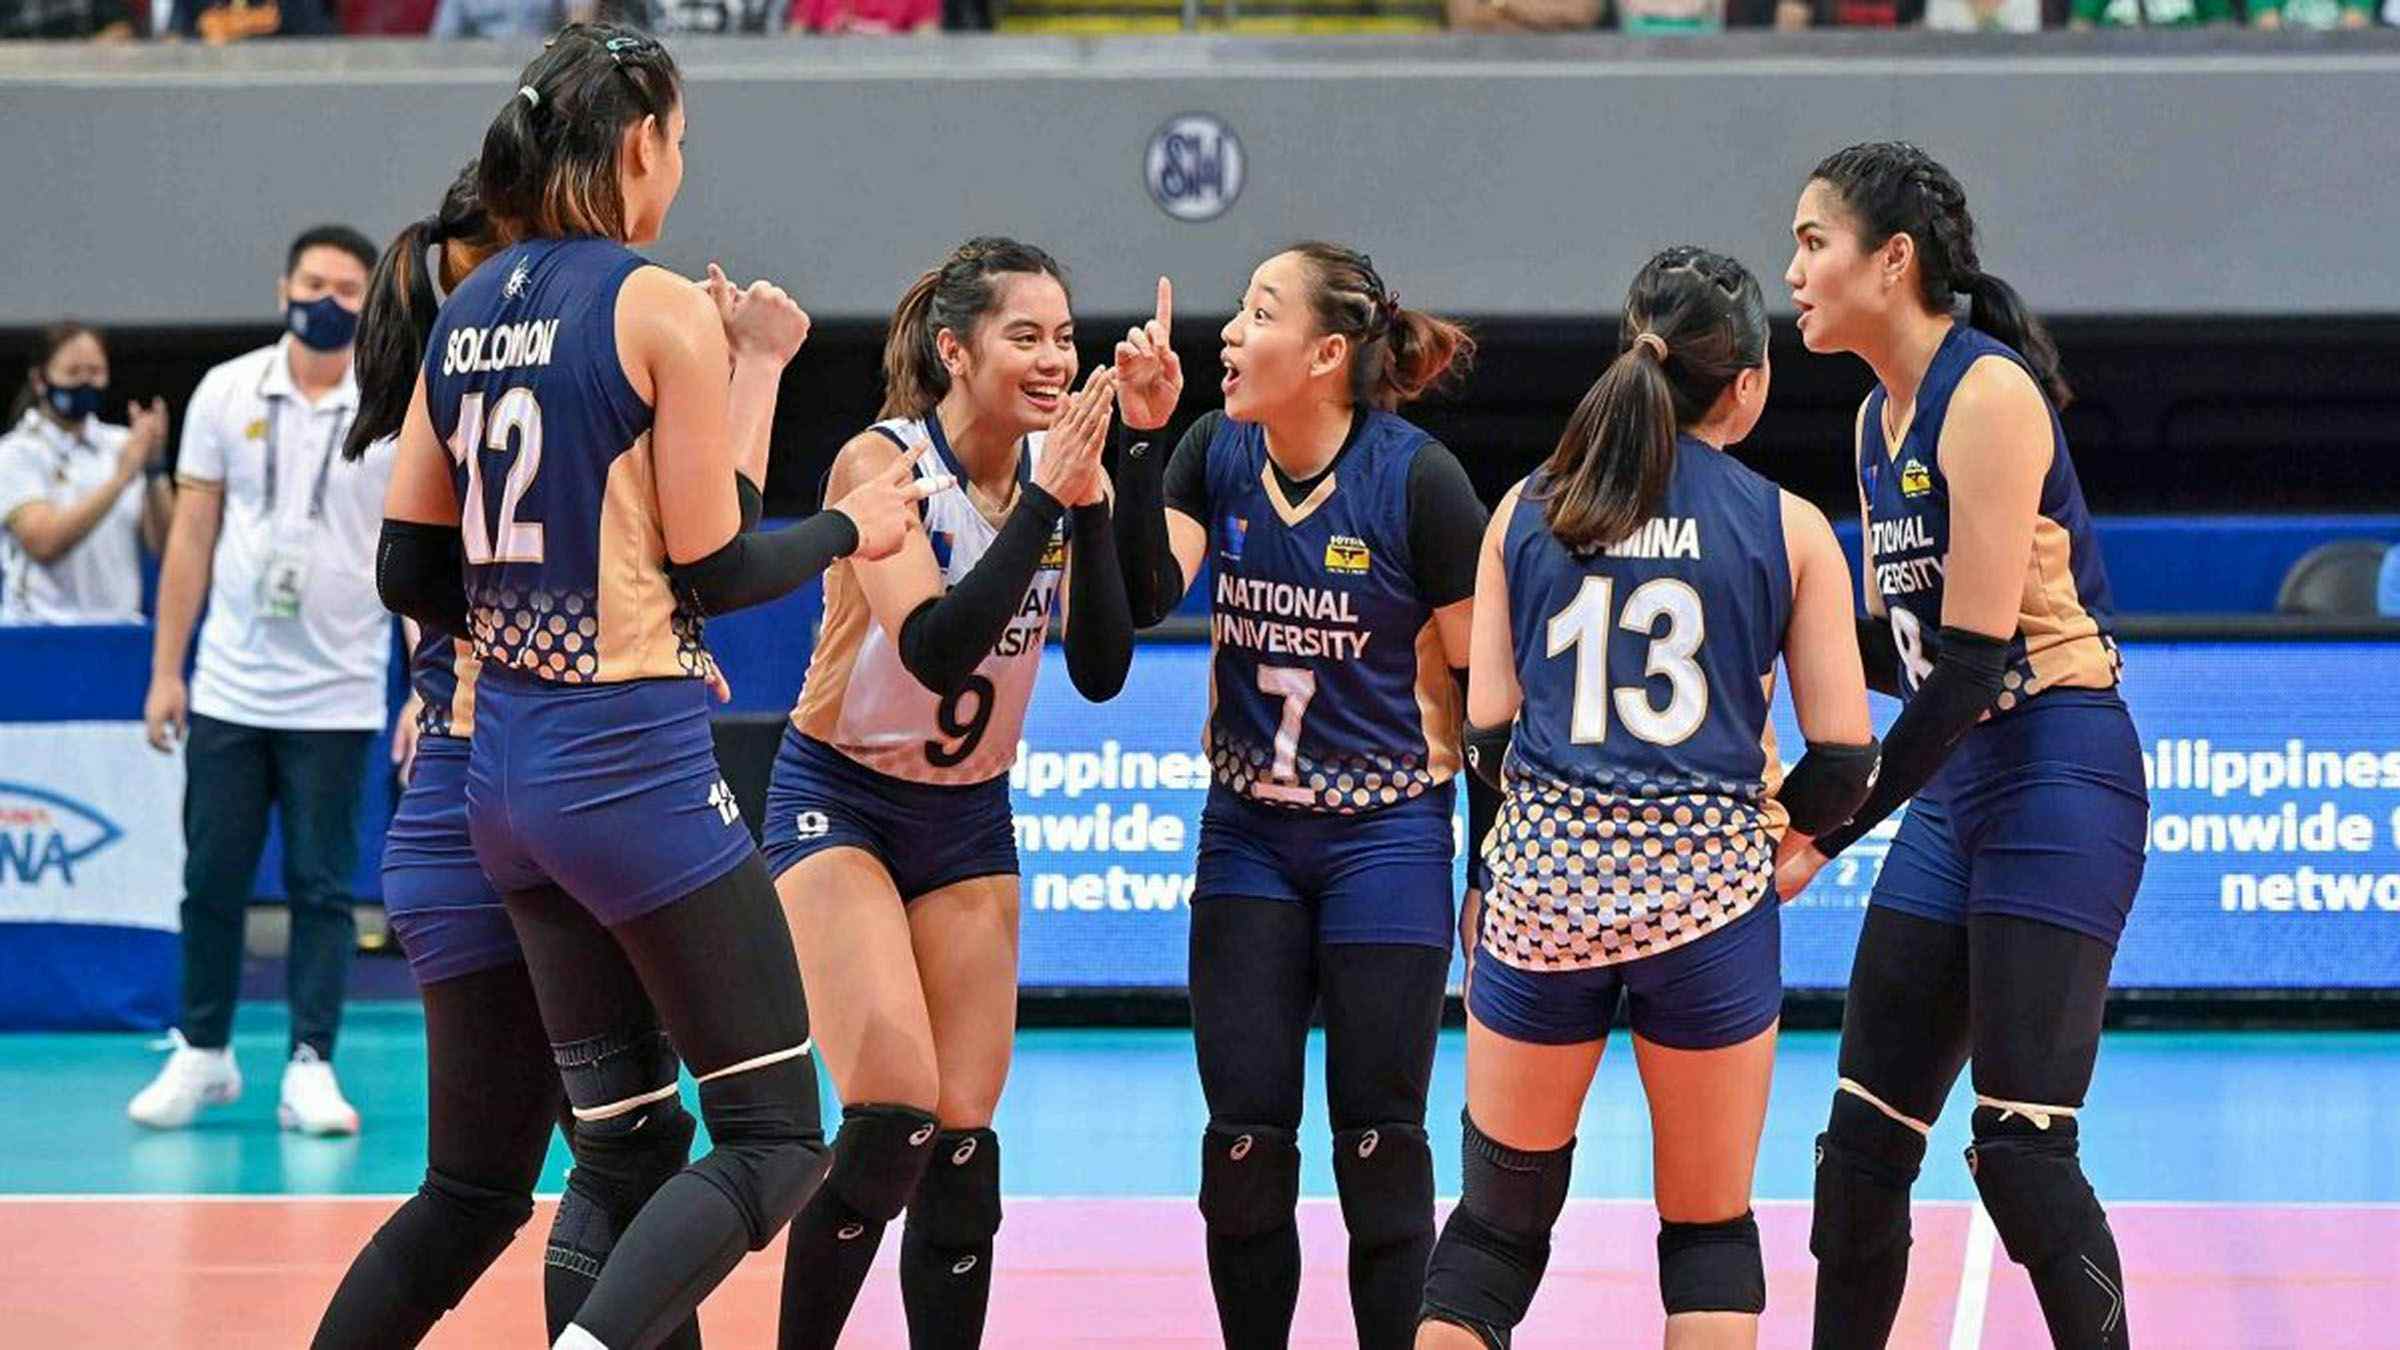 PVL Invitational Champs to play in AVC instead